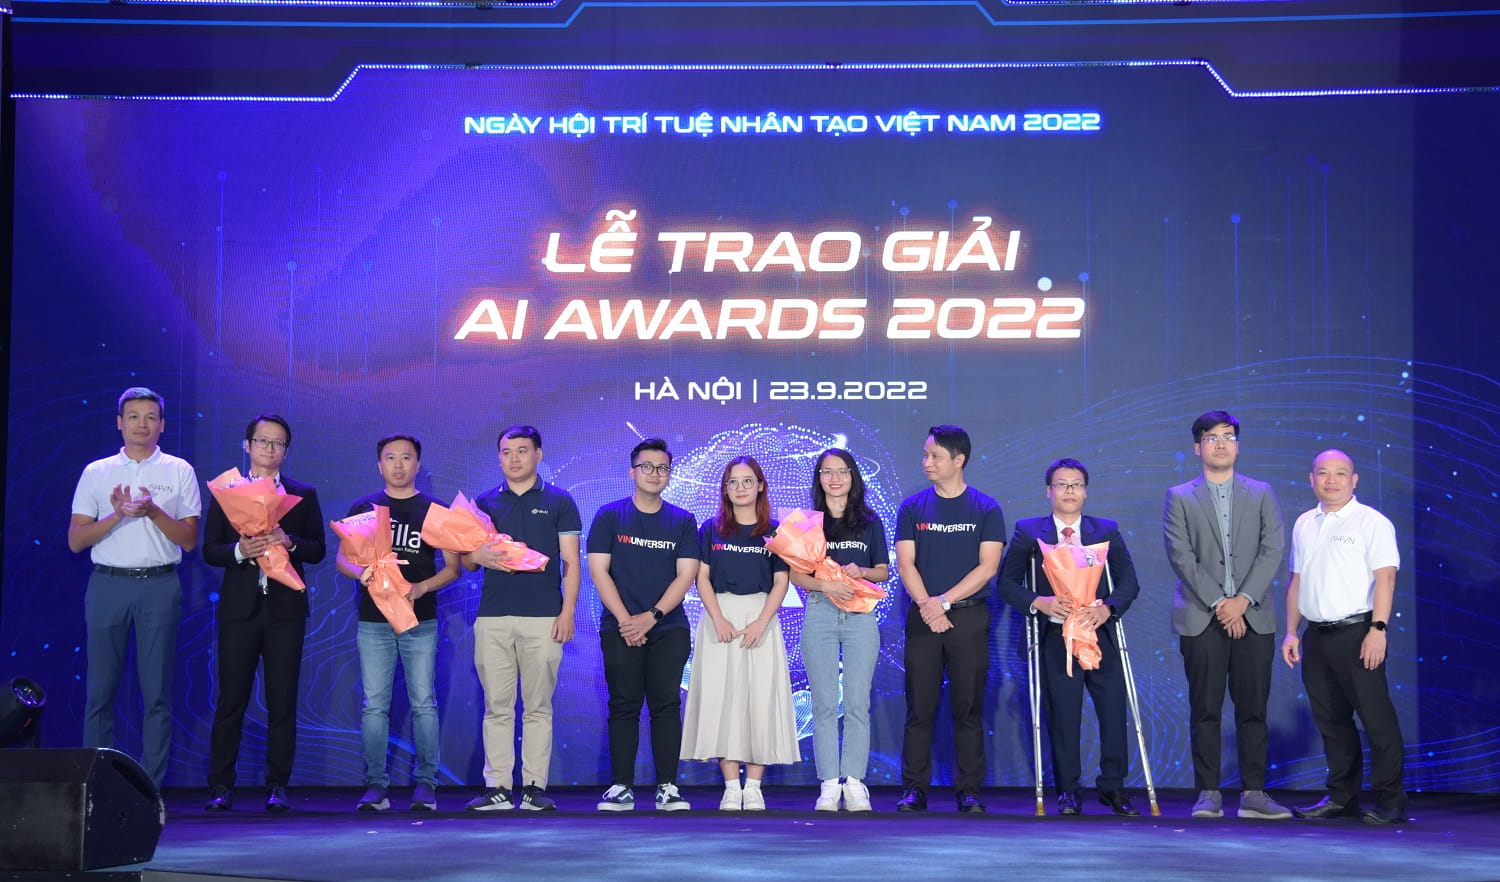 The AI Awards 2022 ceremony within the framework of AI4VN